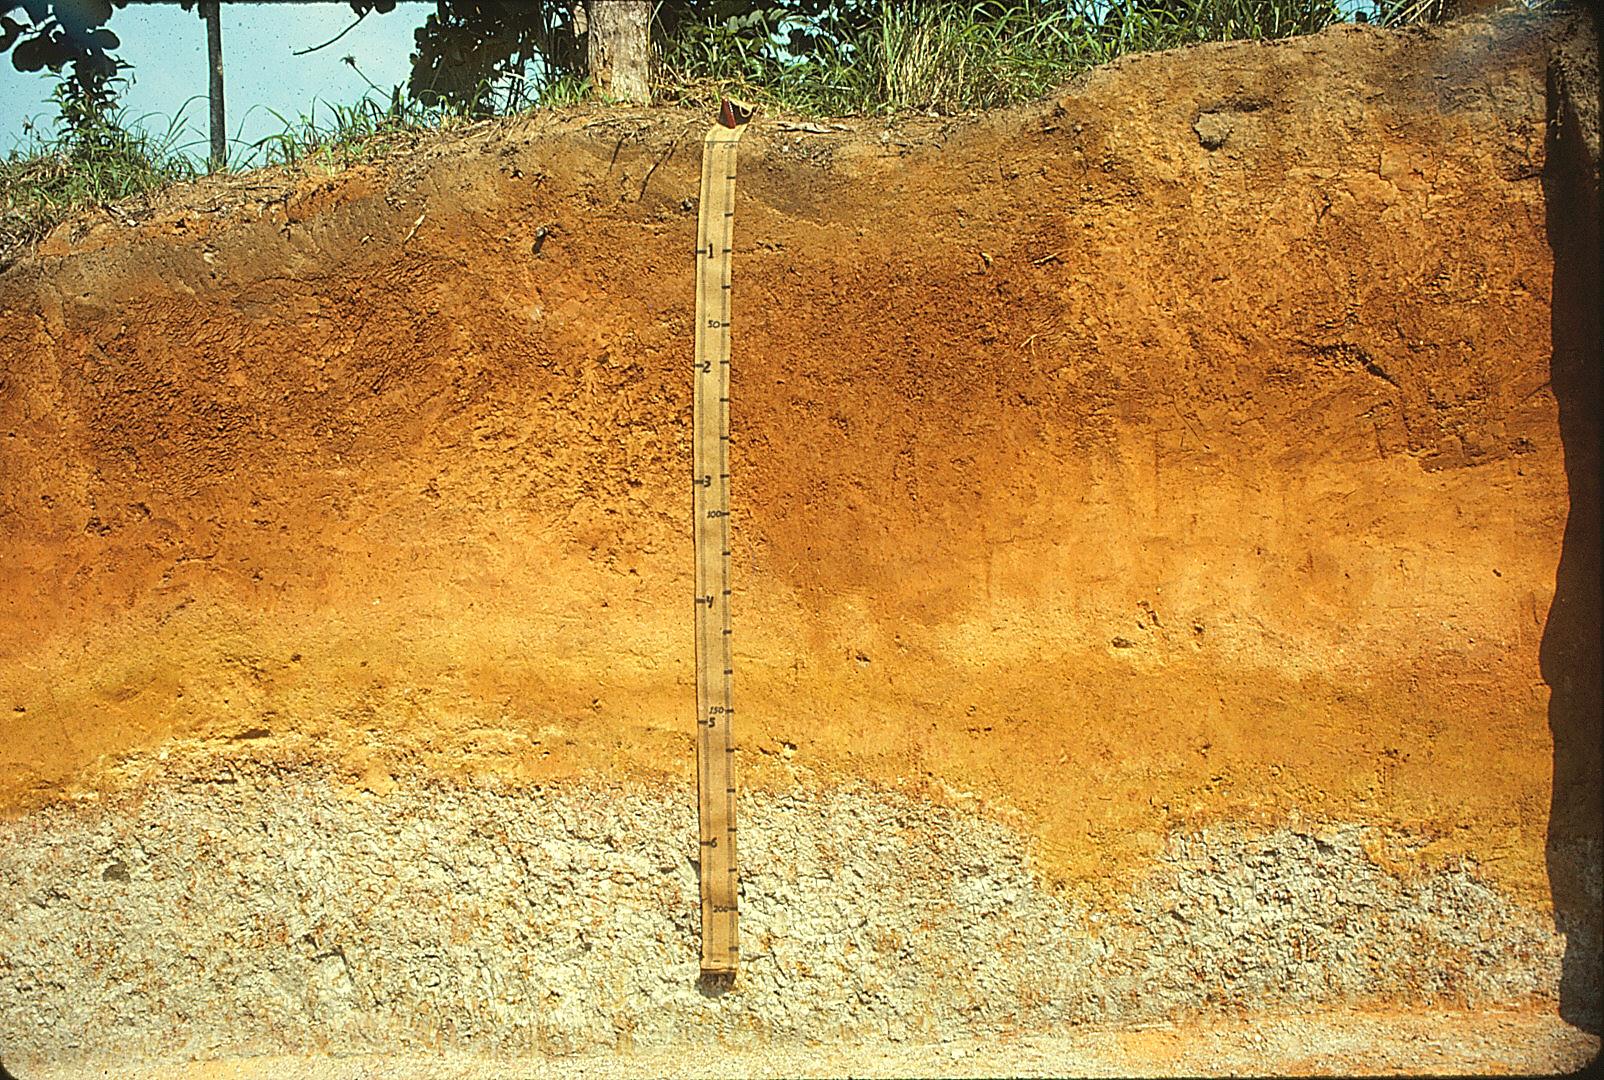 Soil is cut to reveal an upper brown layer, a middle orange-brown layer, and a tan bottom layer. Vegetation is visible on the soil surface.